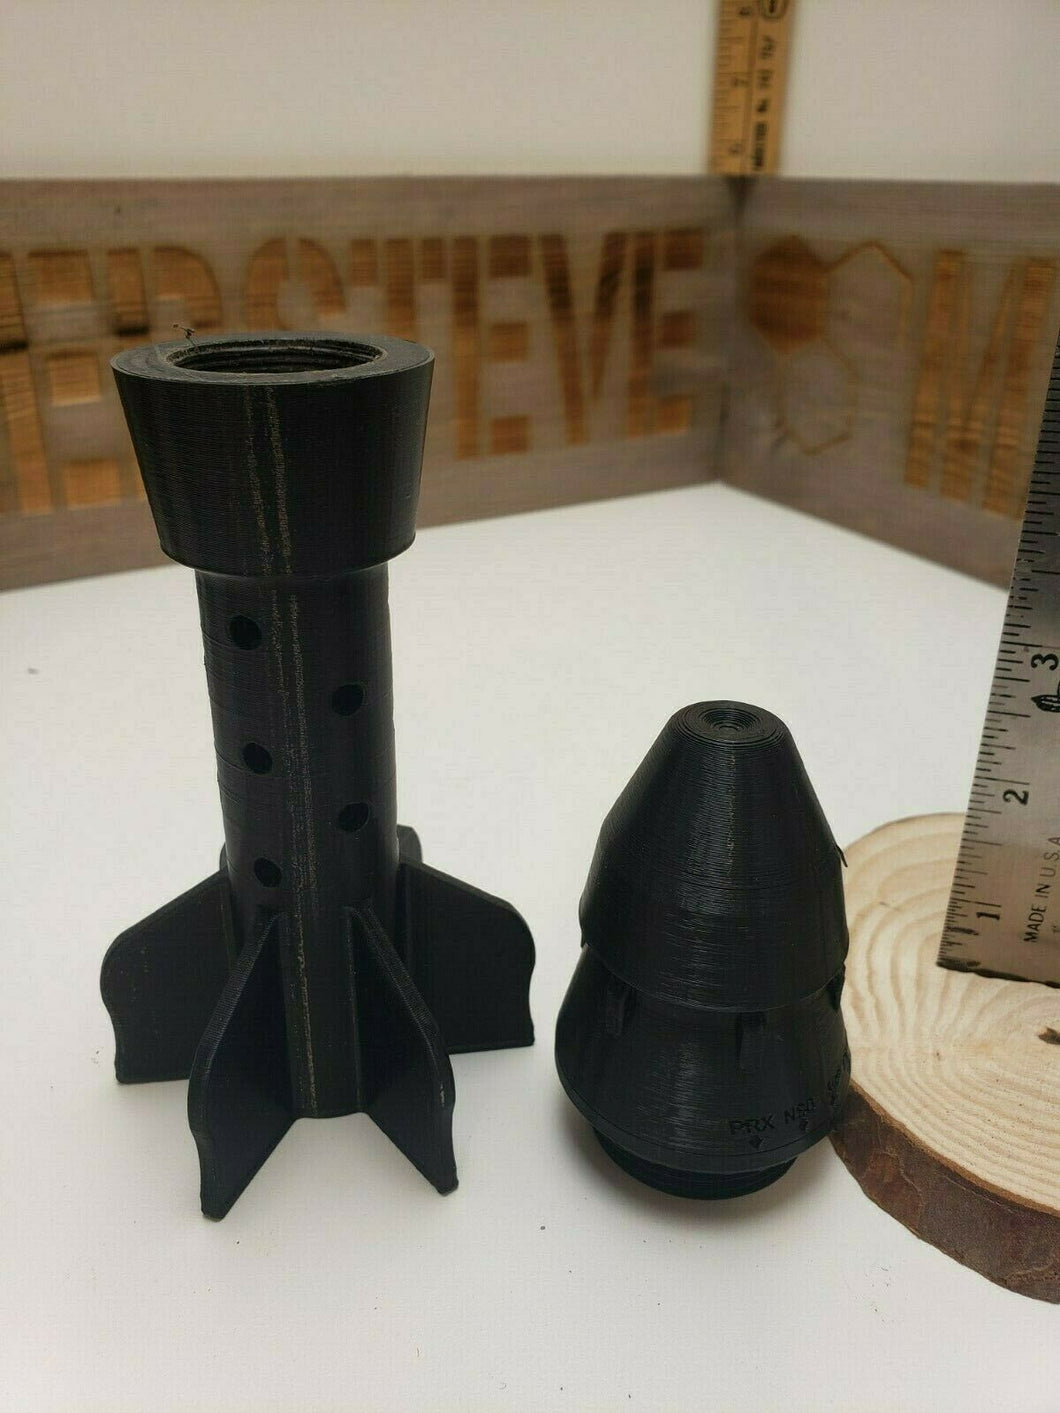 81mm Mortar Body - 3D printed Tail fin and Fuze Replica  - Set!